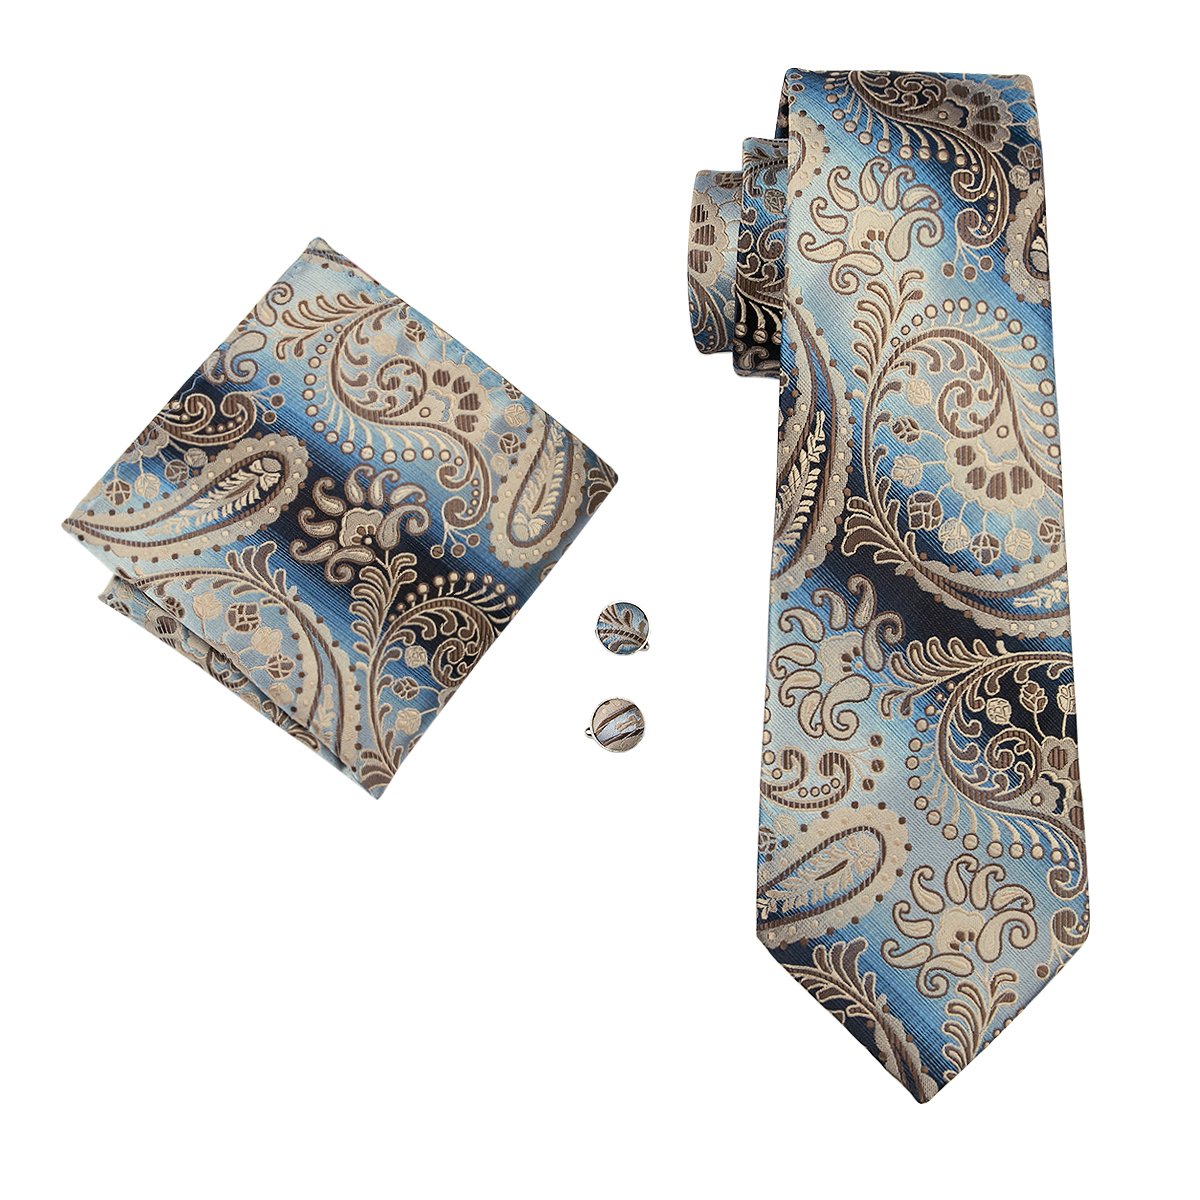 Essential Brown Paisley Tie Pocket Square Cufflinks Set - barry-wang